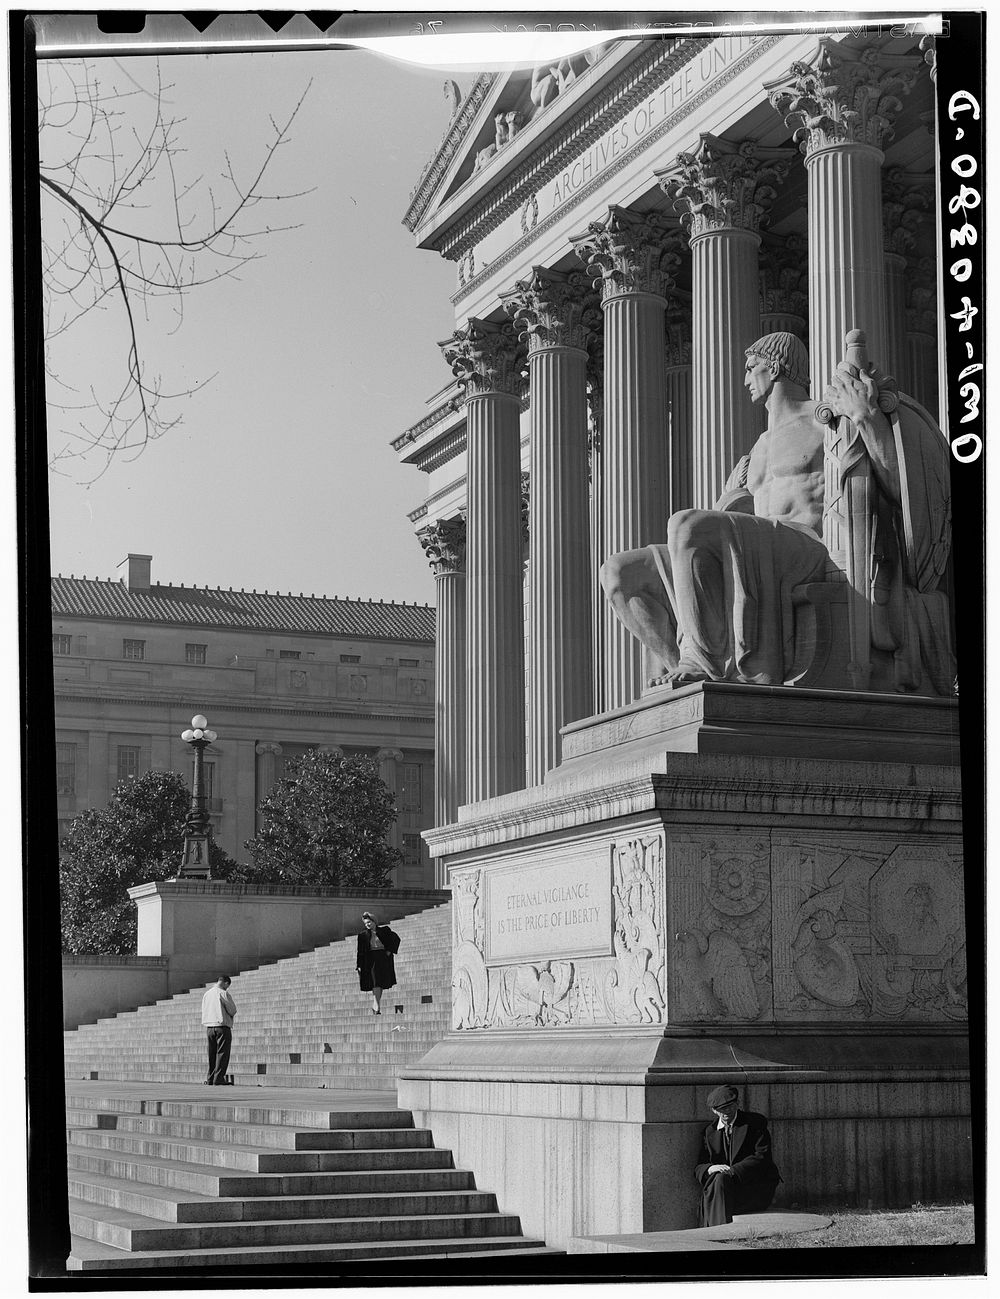 [Untitled photo, possibly related to: Washington, D.C. The National Archives building]. Sourced from the Library of Congress.